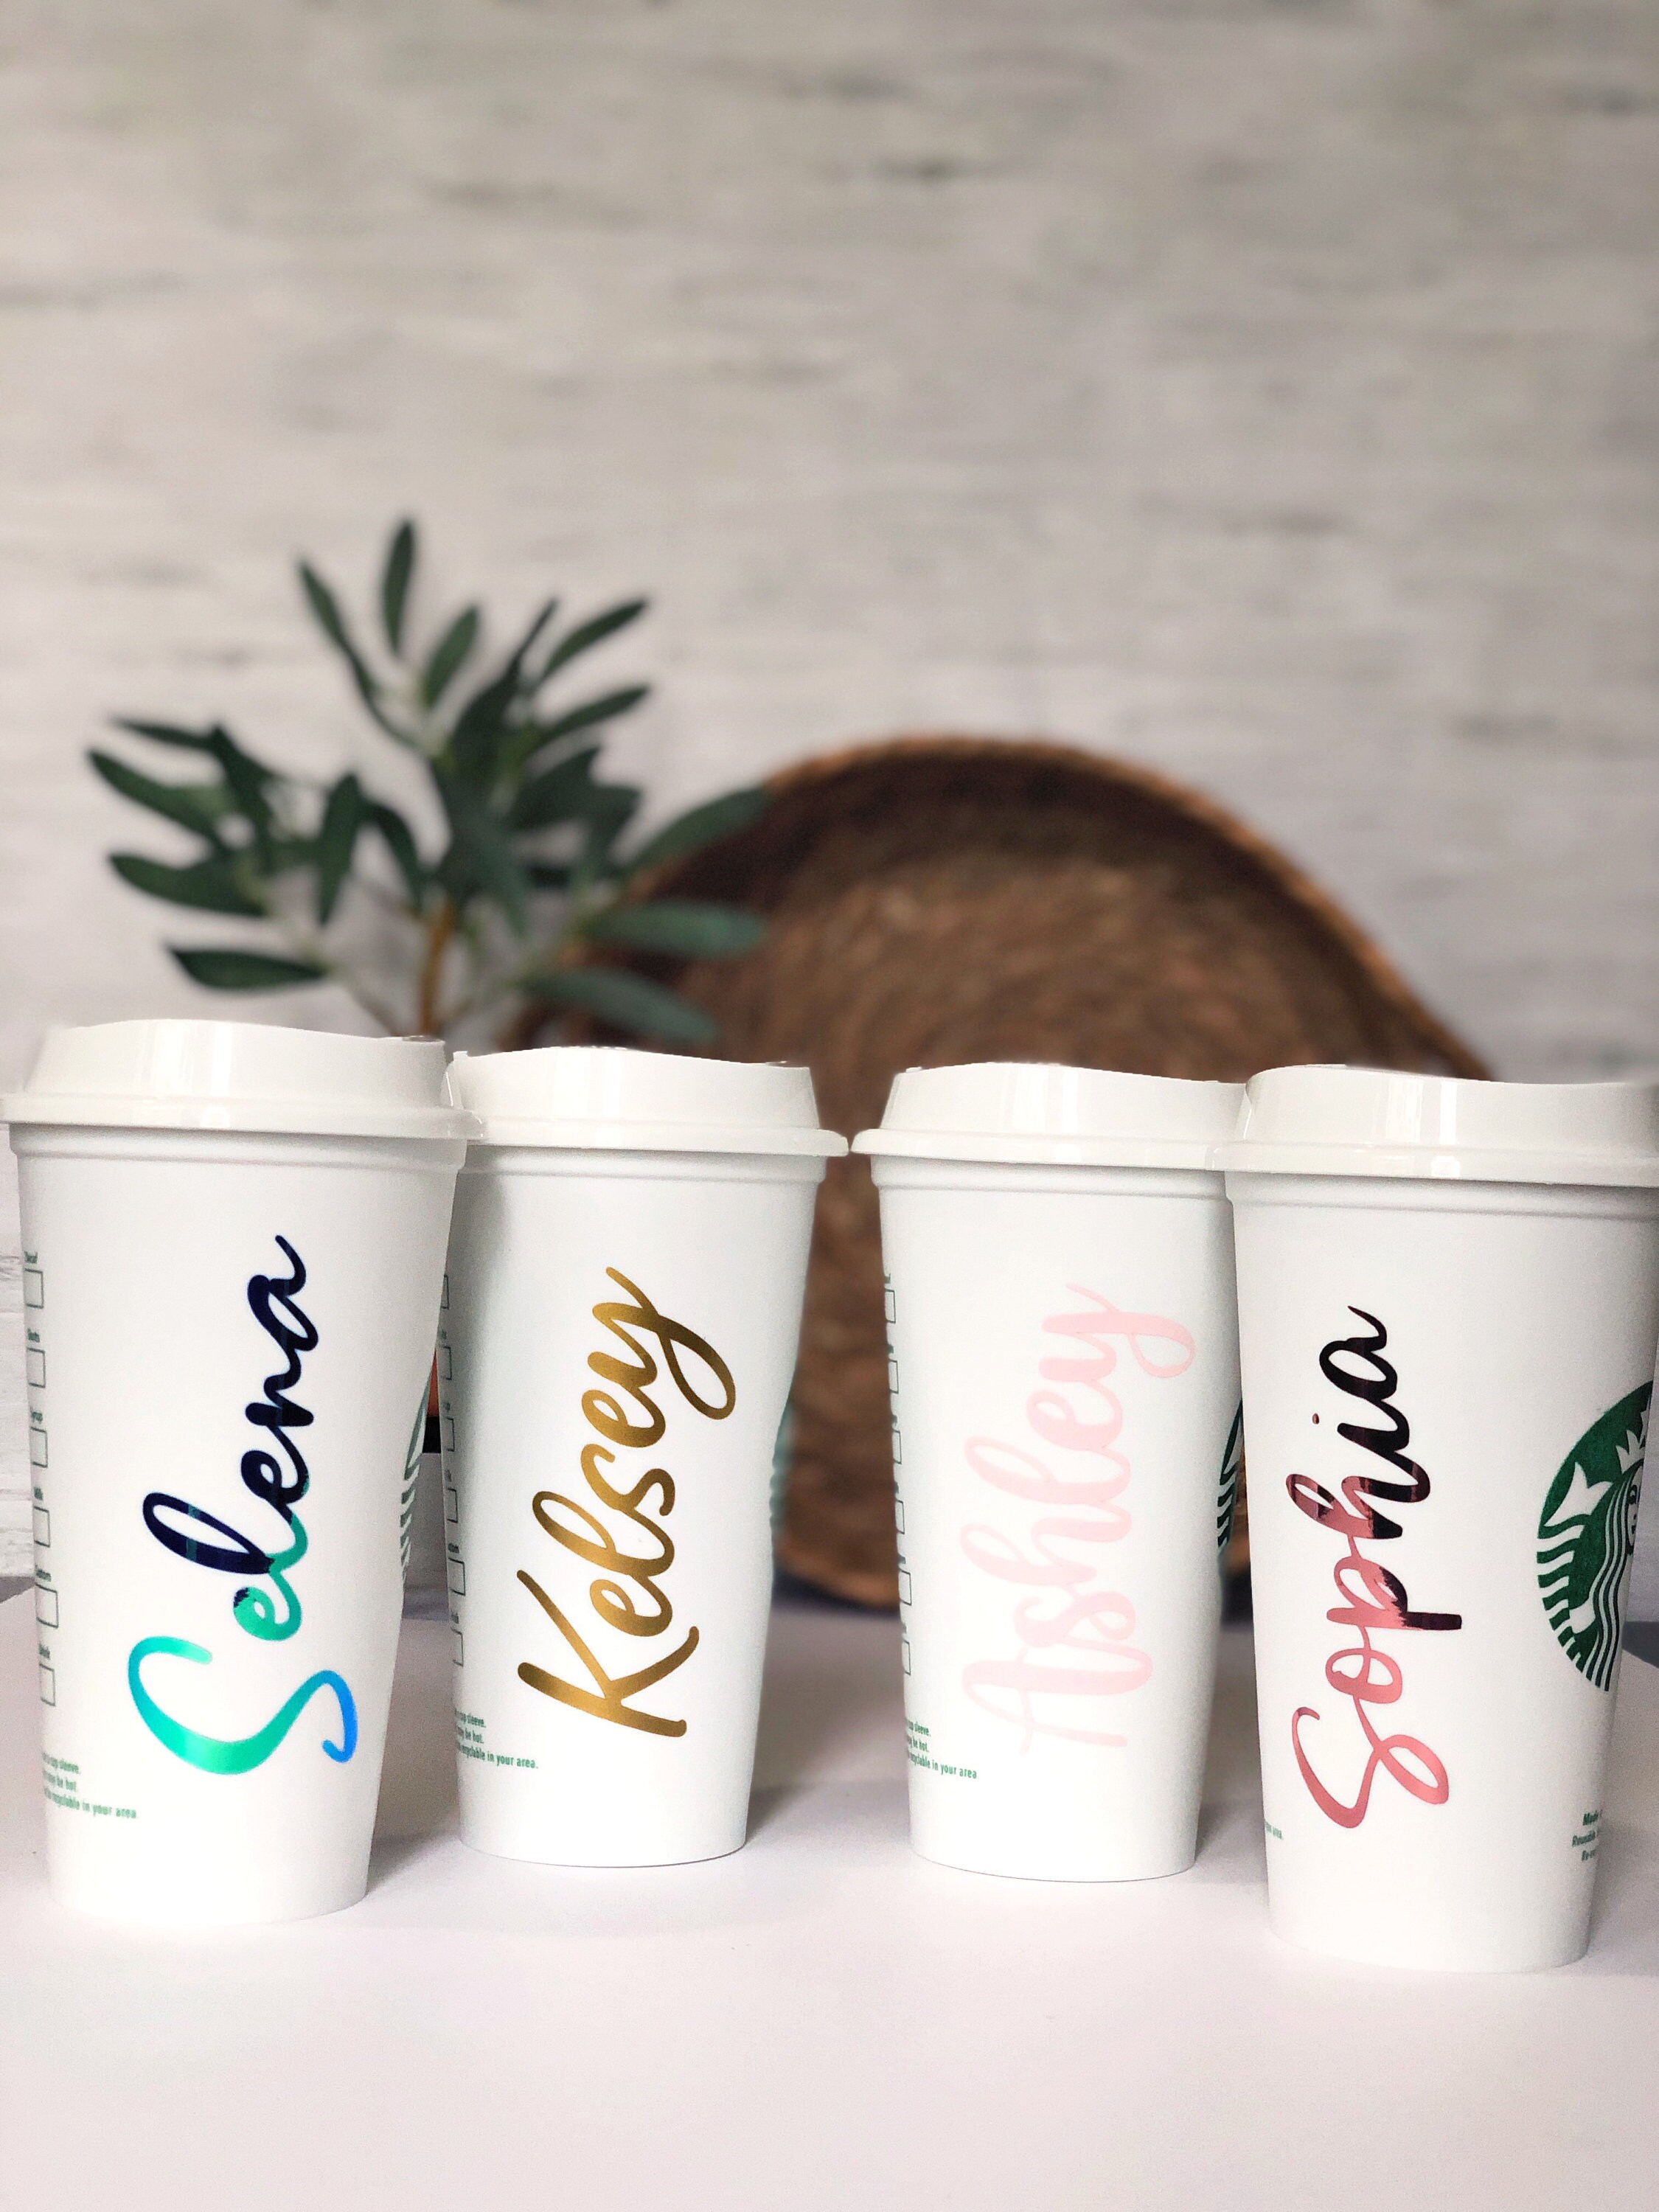 Starbucks Reusable Cup Personalised Hot Coffee Cup Travel Mug secret Santa  Stocking Filler Gift for Her White Cup Coffee 